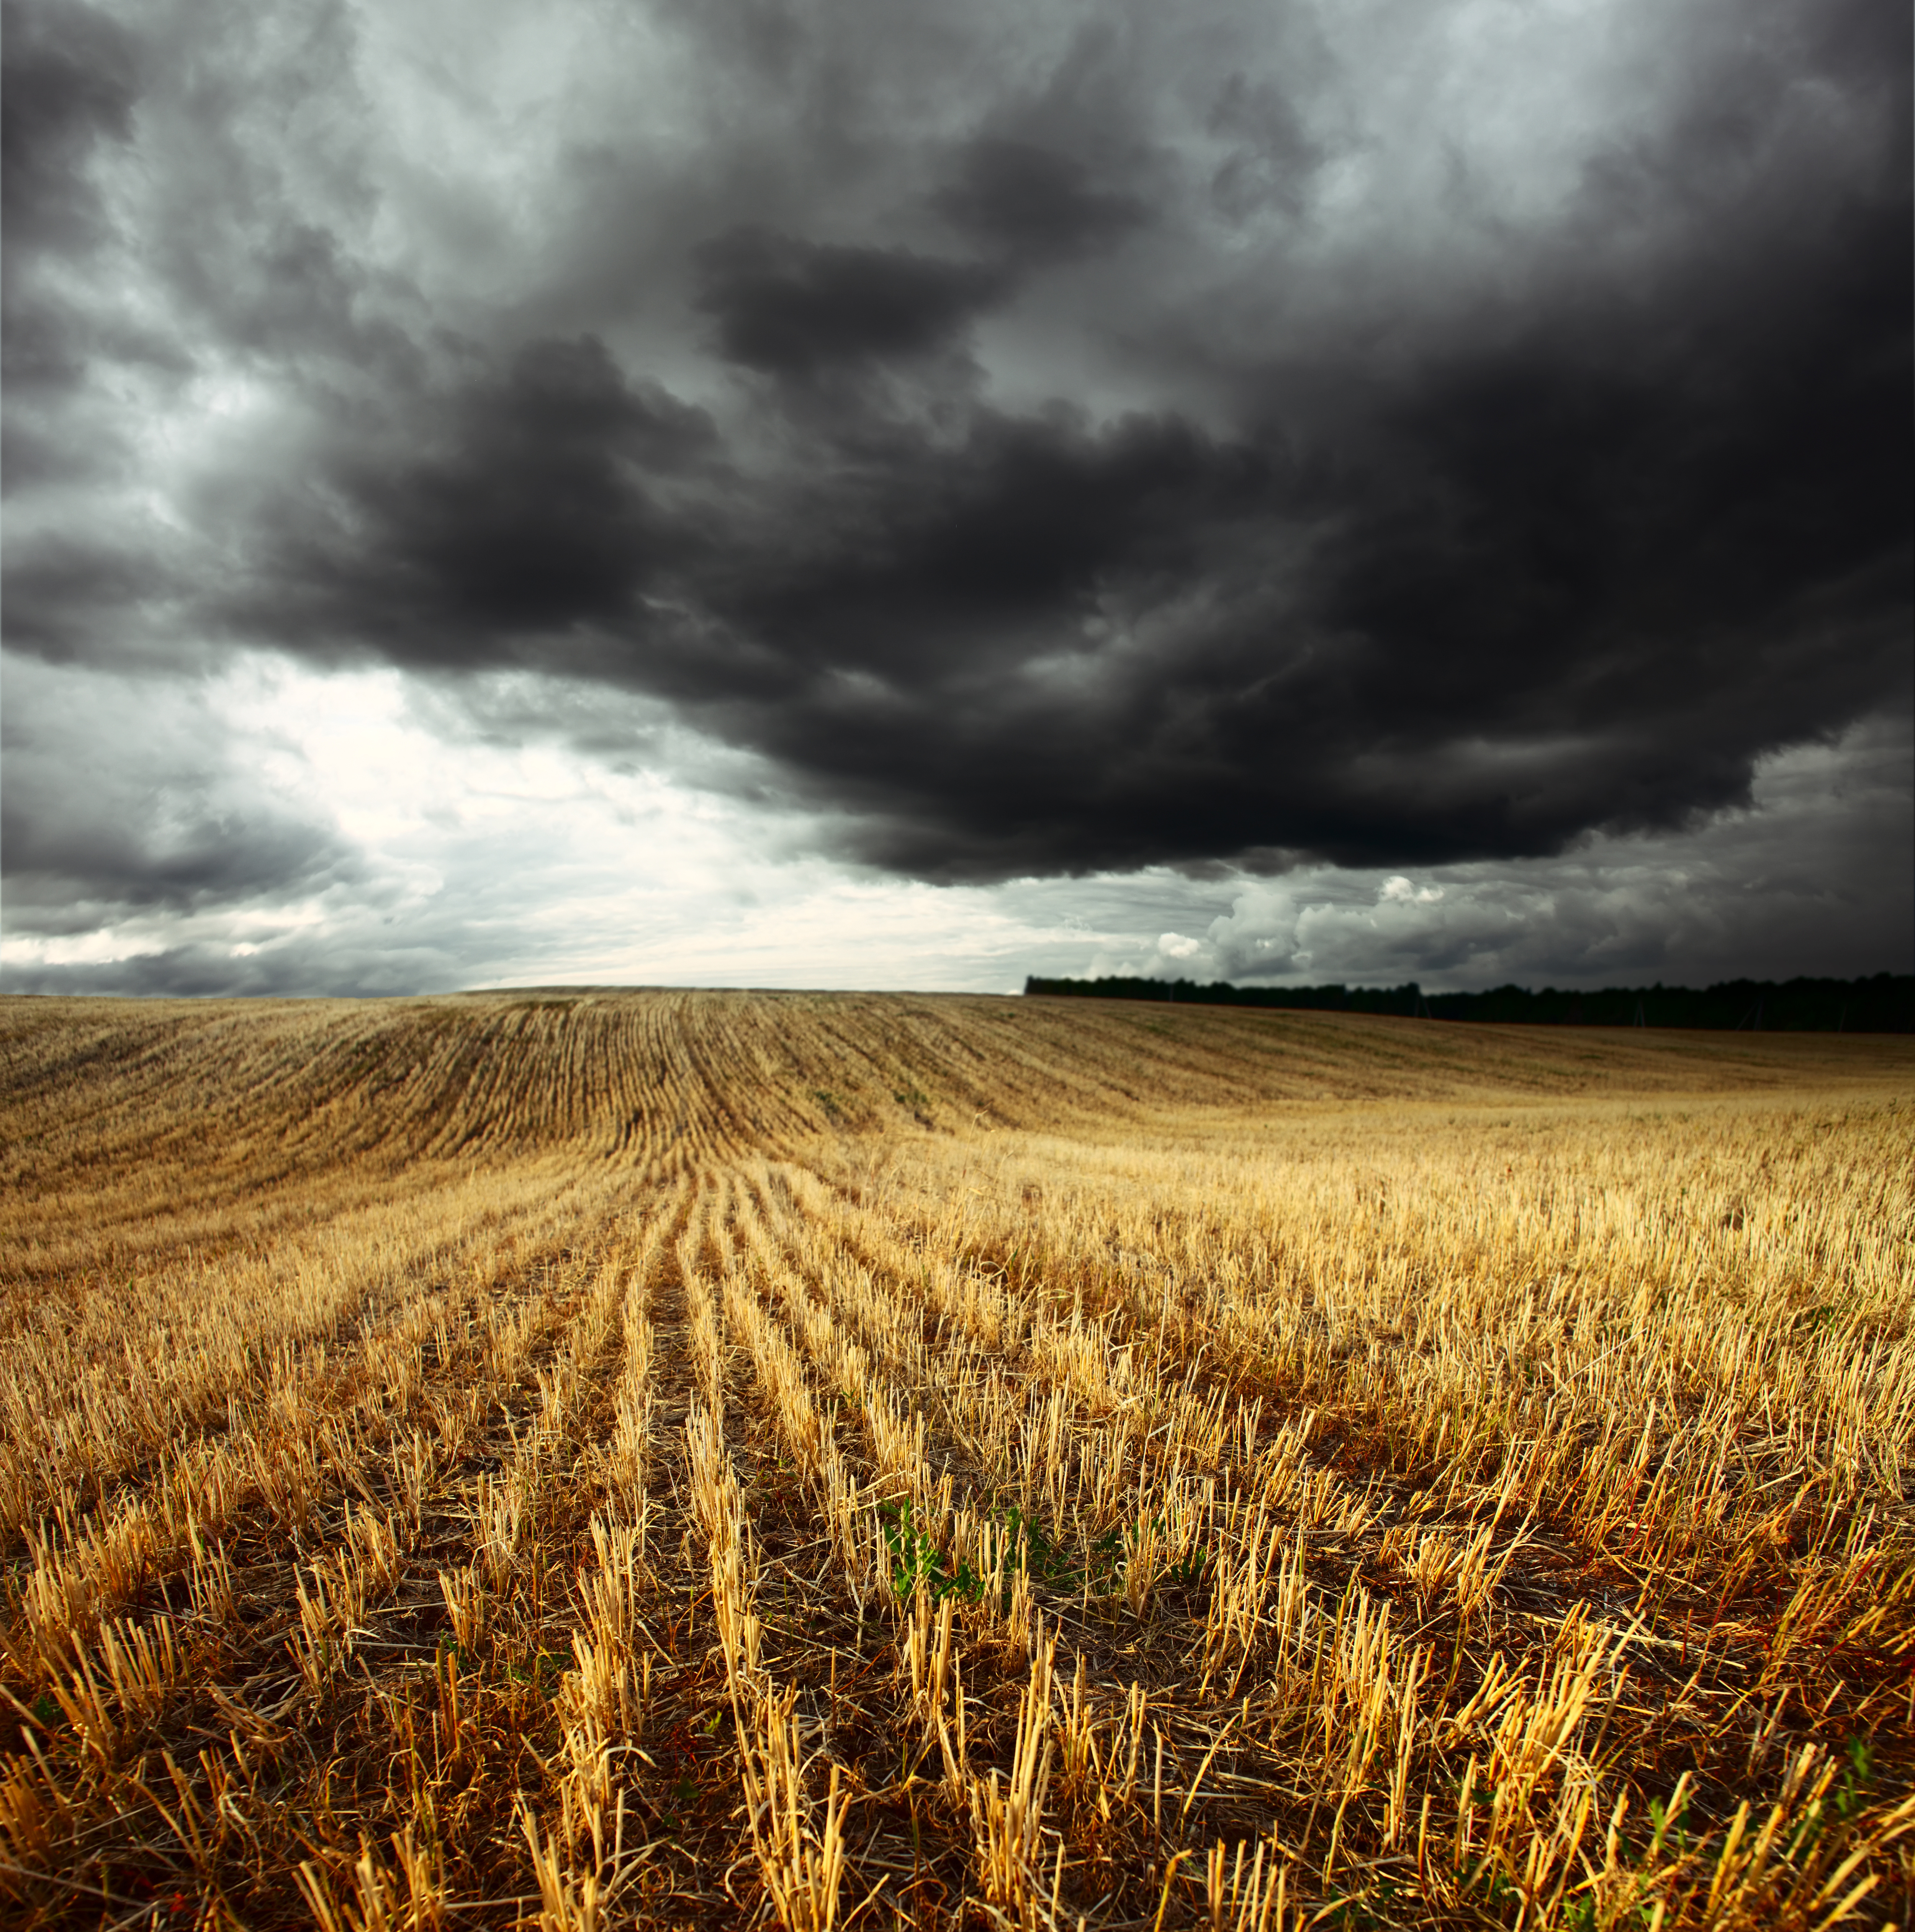 Emergency Relief - What Can Impacted Farmers Do?